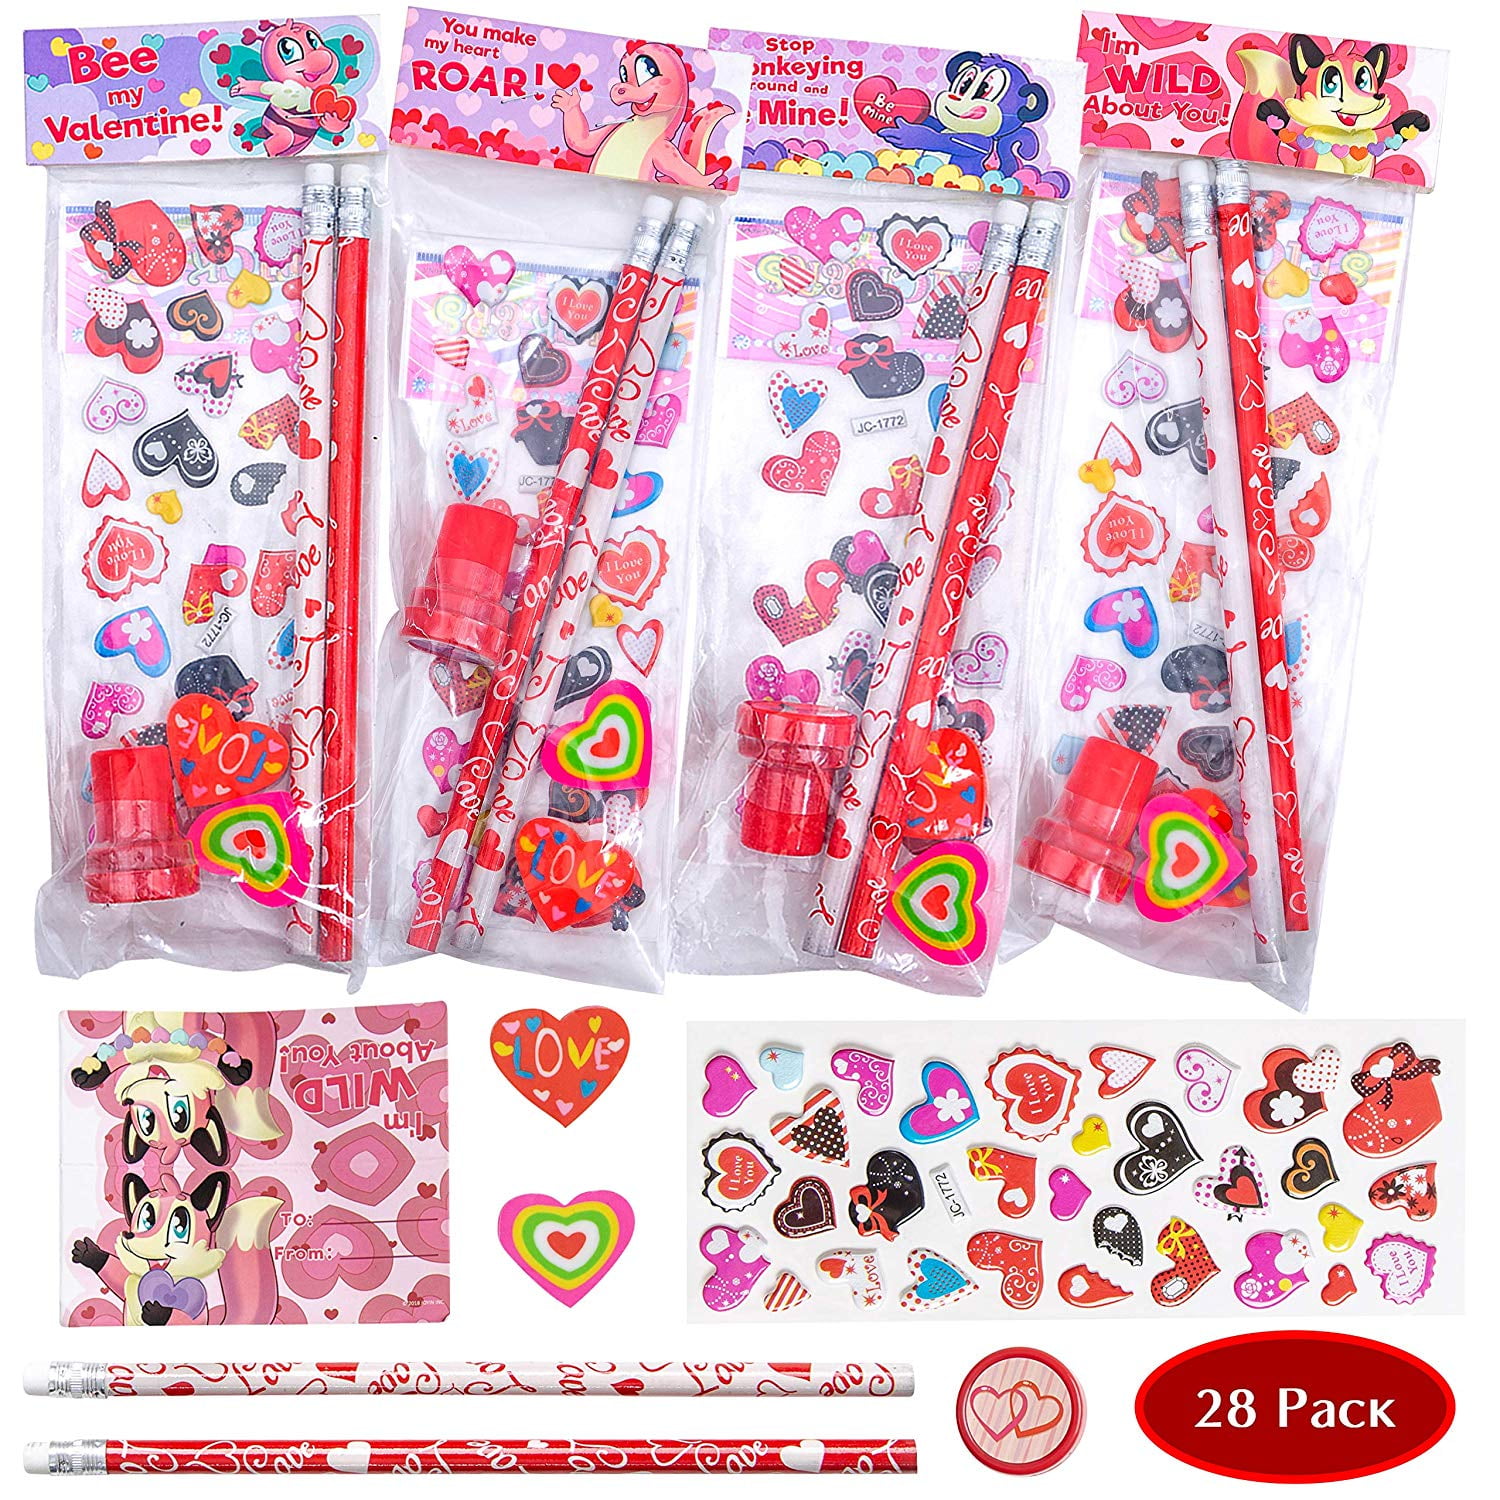 28 Pcs Valentines Day Cards with Whistles for Valentine Party Favor Classroom Prize Supplies Valentine’s Greeting Cards 